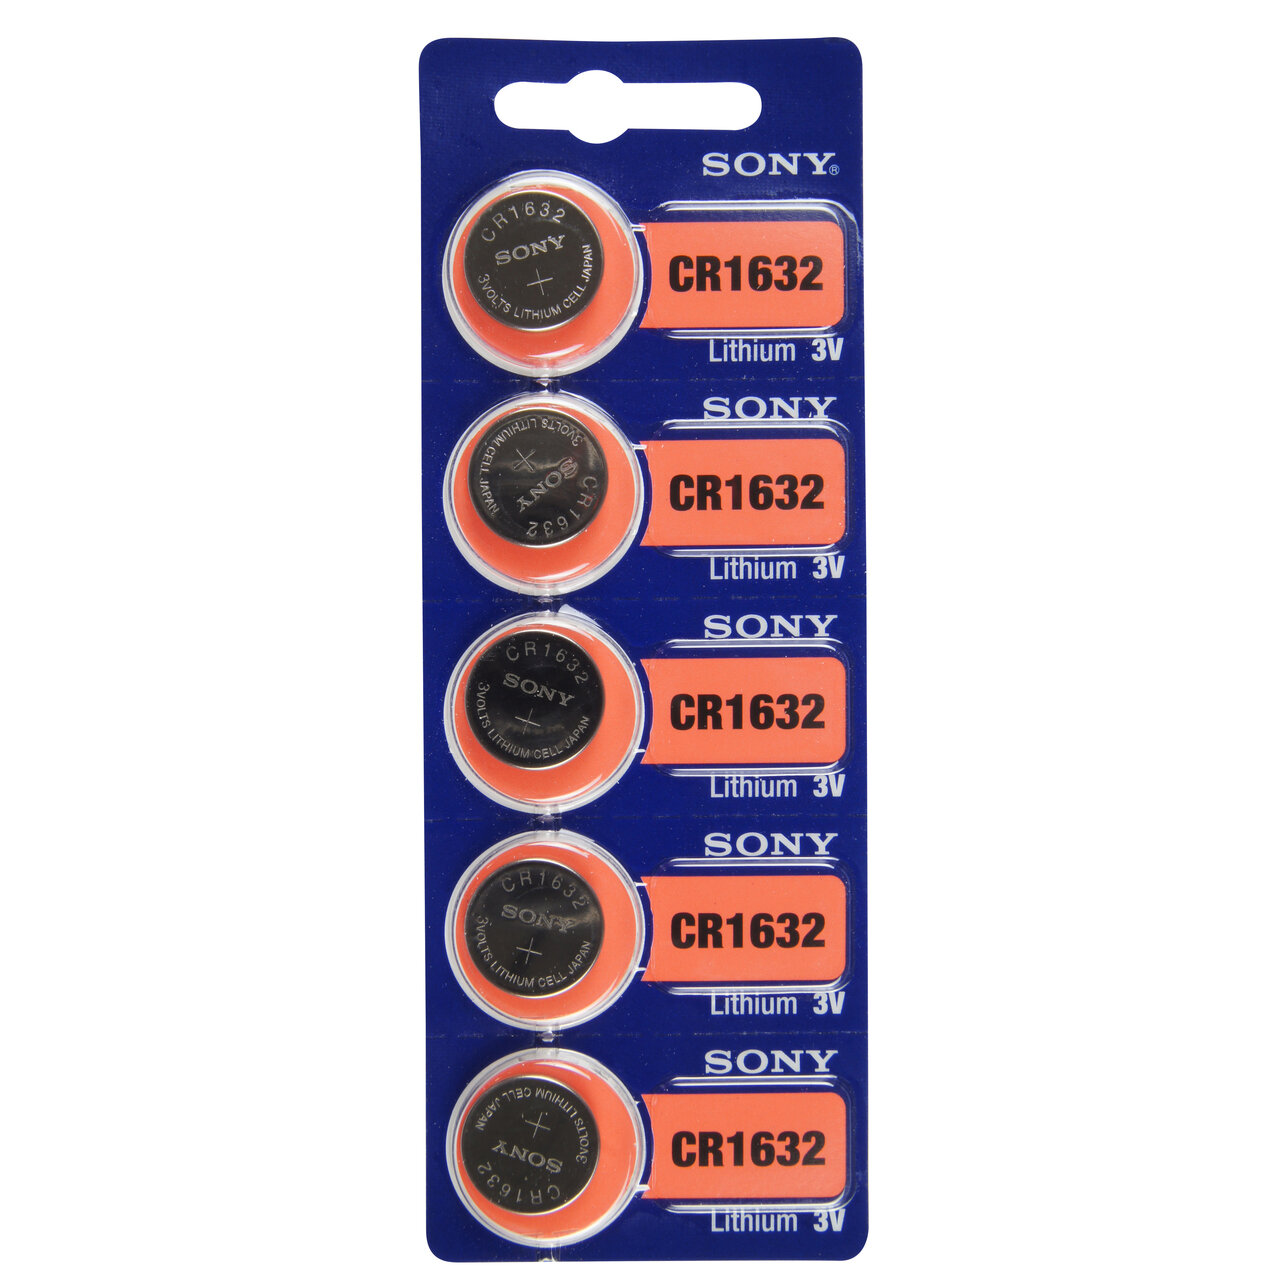 Type 1632 SONY Lithium Battery Tear Strip Pack of 5 SWB1632